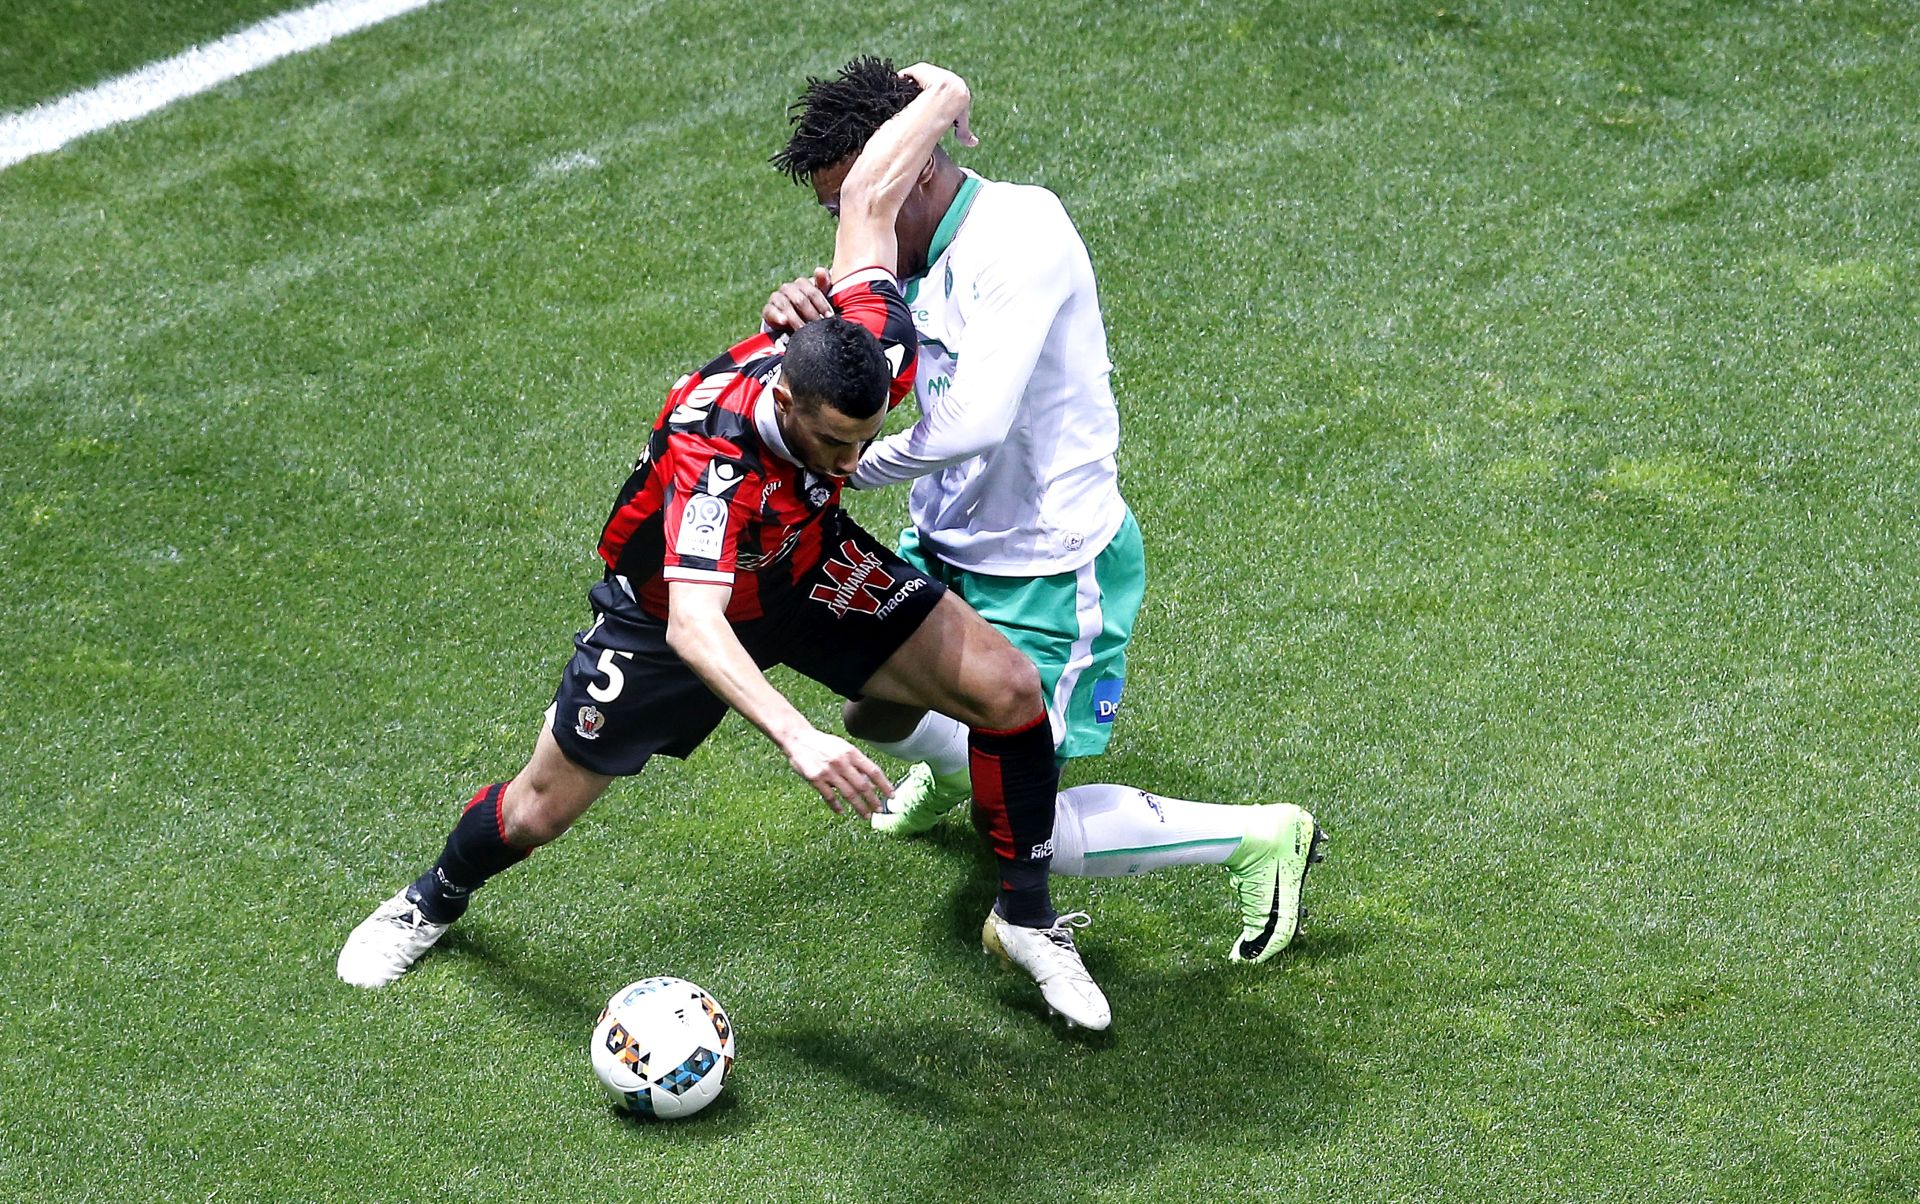 epa05778725 Younes Belhanda of OGC Nice (L) vies for the ball with Ronael Pierre Gabriel of AS Saint Etienne (R) during the French Ligue 1 soccer match OGC Nice vs AS Saint Etienne, at the Allianz Riviera stadium, in Nice, France, 08 February 2017.  EPA/SEBASTIEN NOGIER